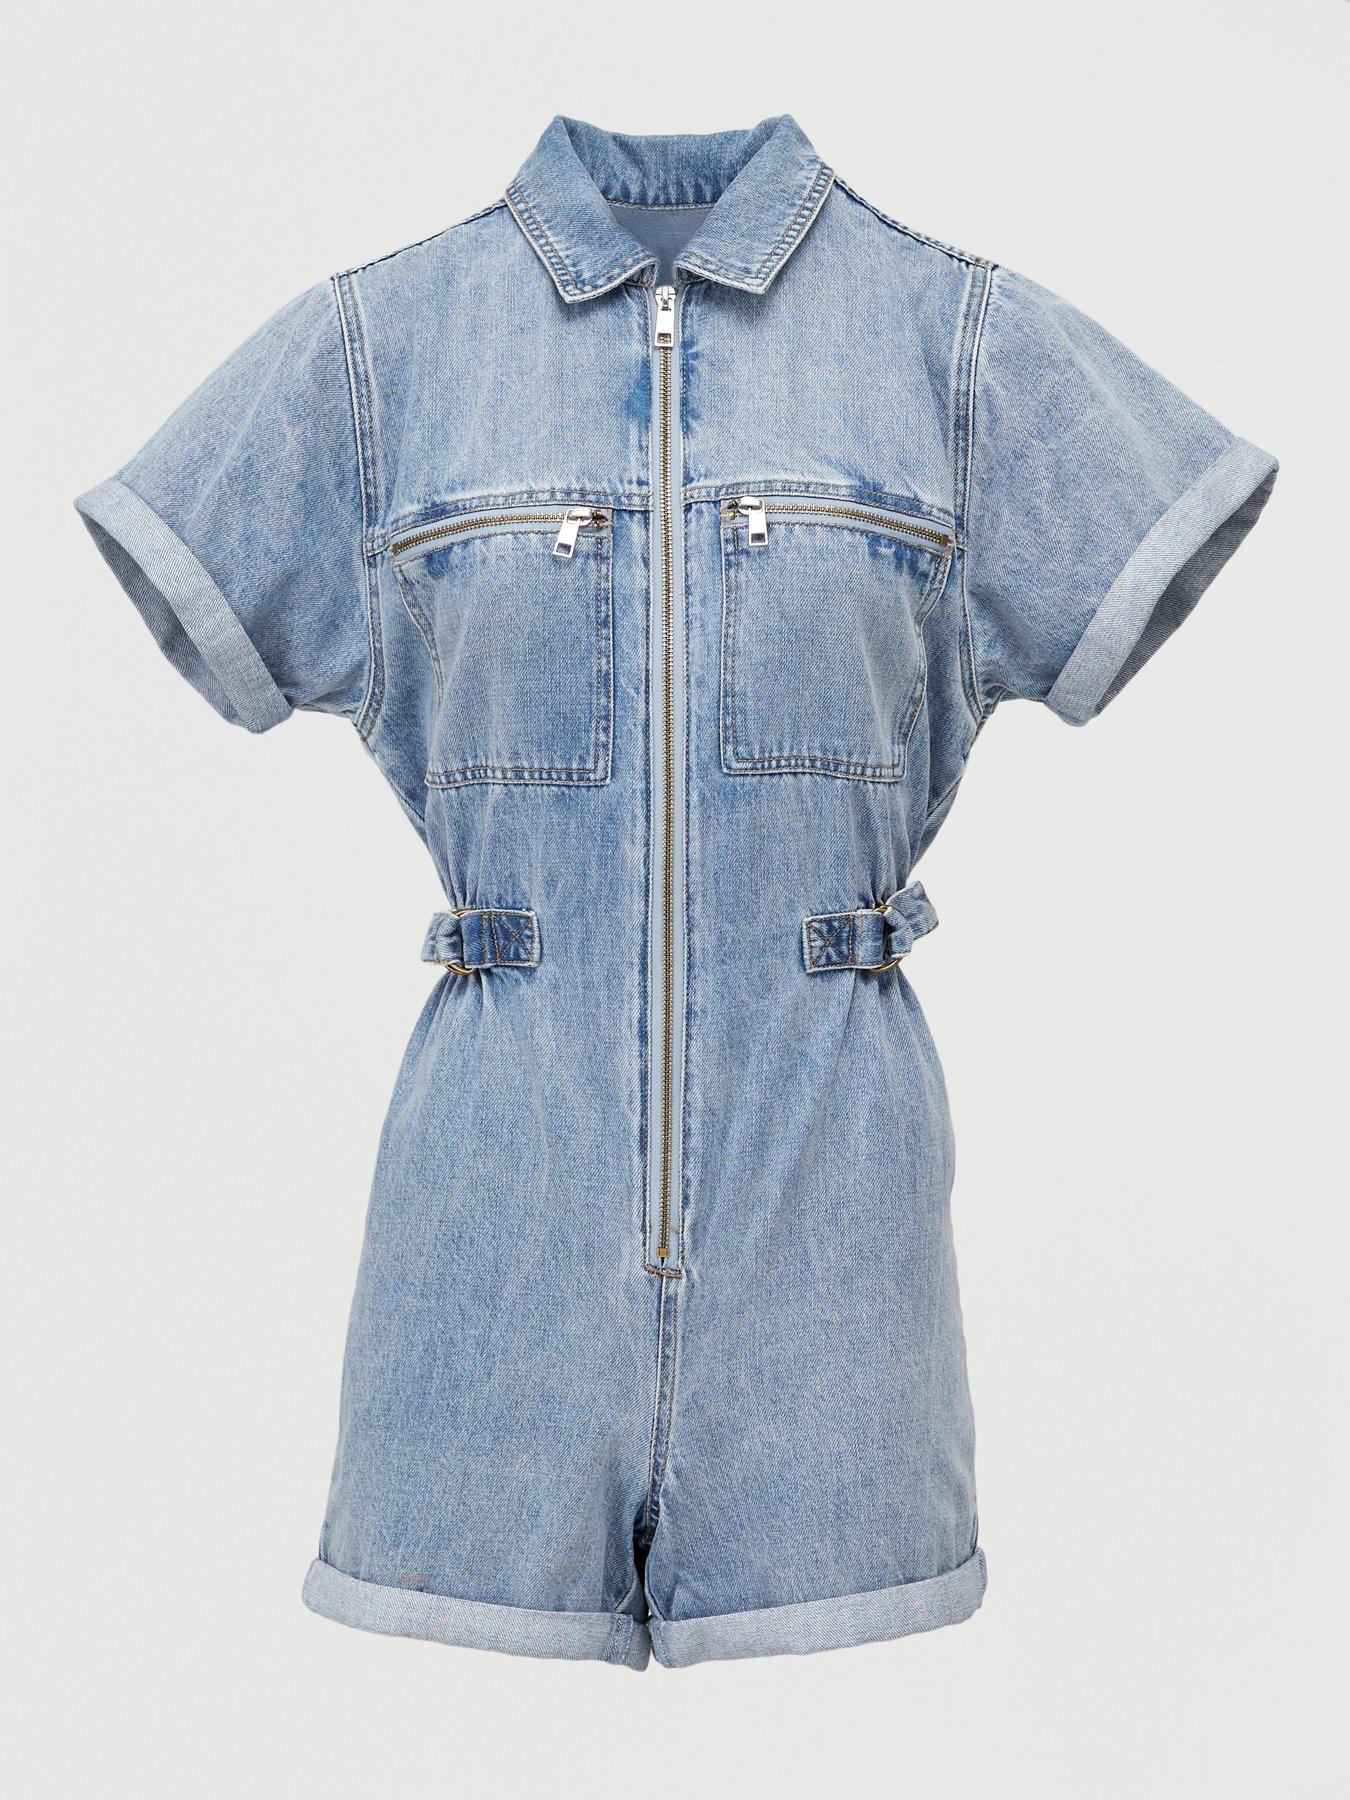 littlewoods playsuits